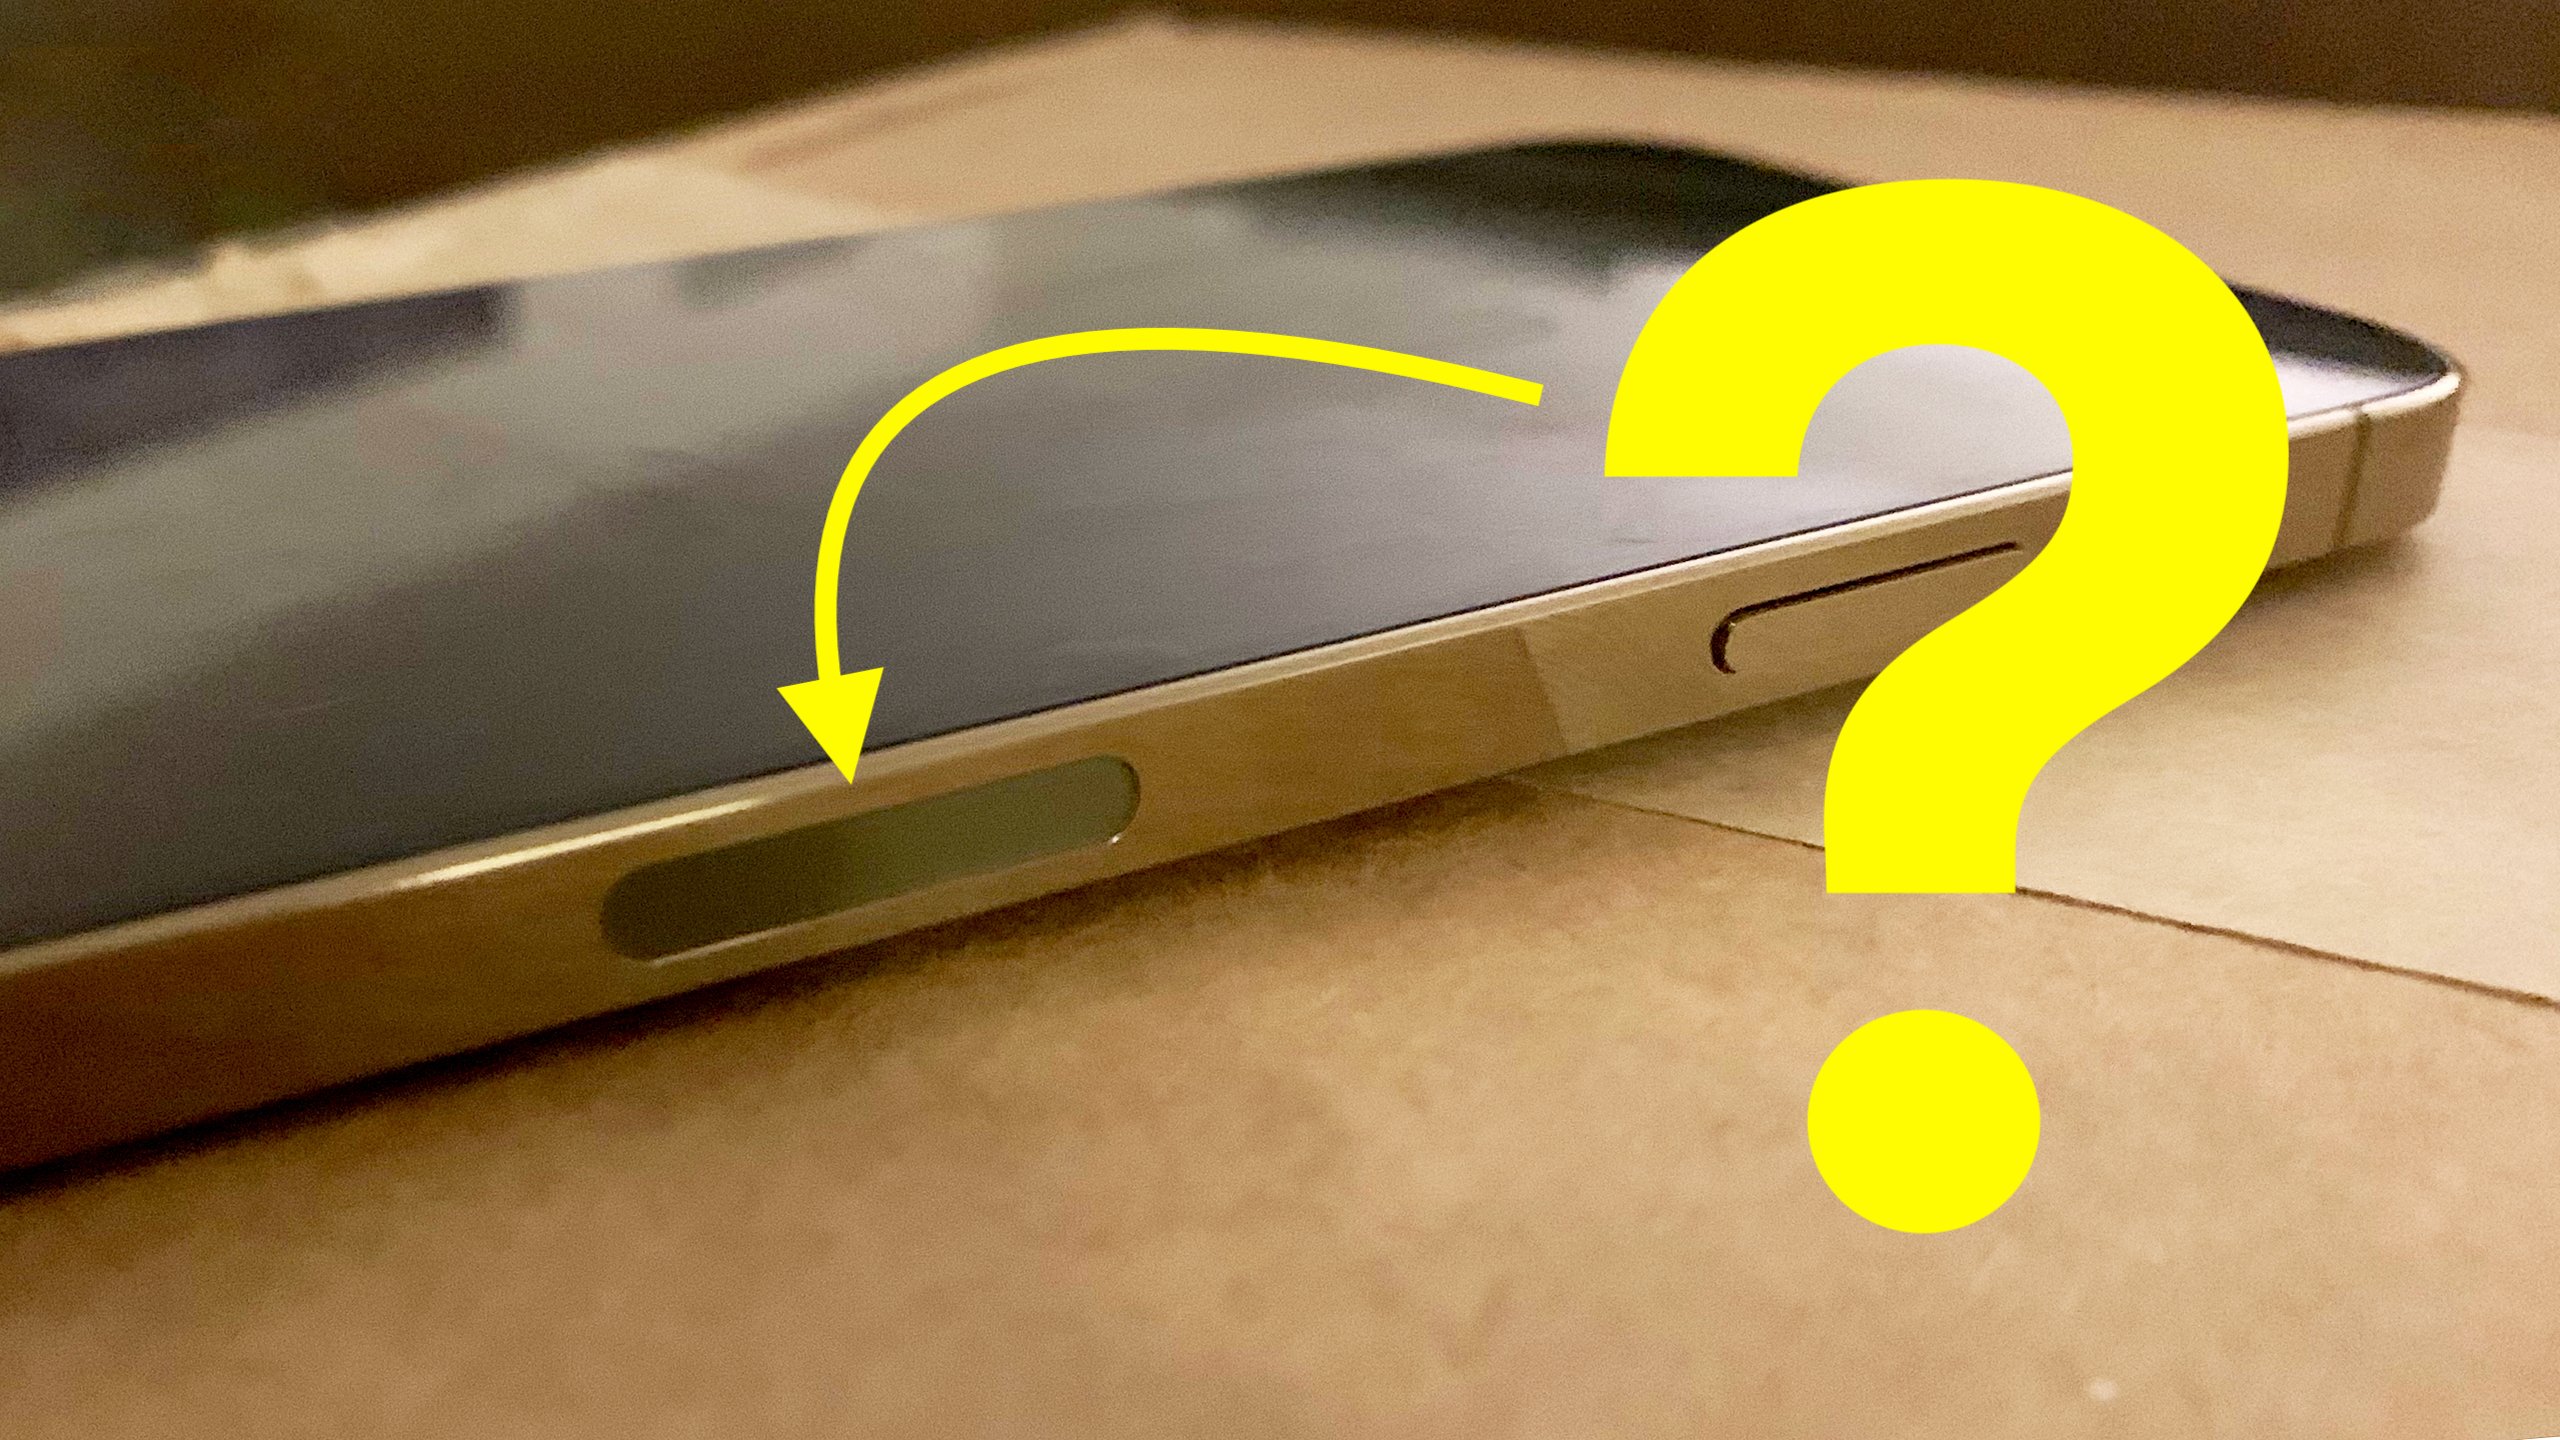 Why The iPhone 12 Has A Black Oval Indentation On The Side